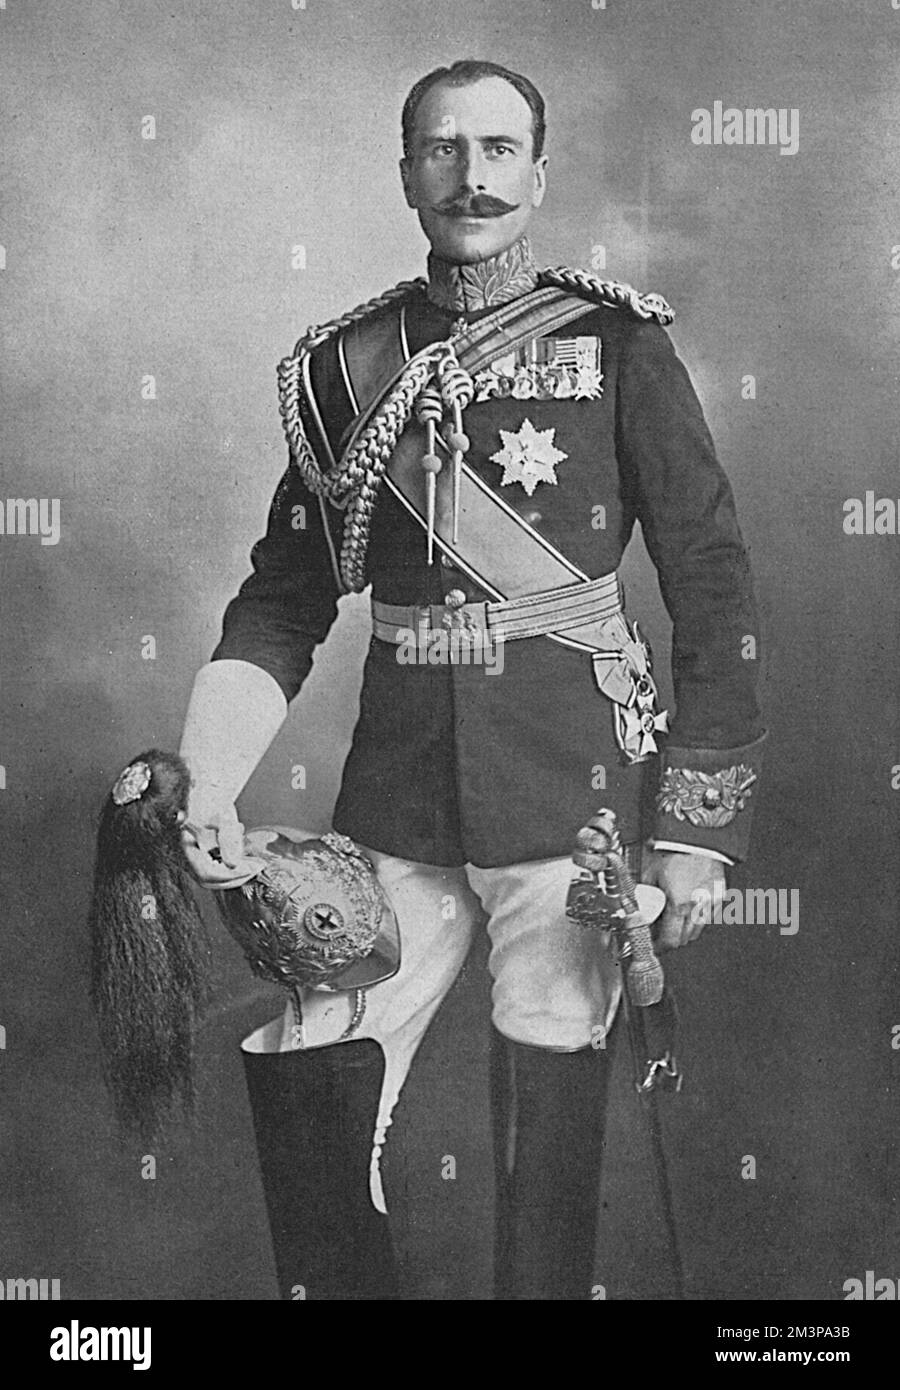 Prince Alexander of Teck (1874-1957), later Earl of Athlone, brother of Queen Mary, who had recently been promoted to the rank of Brigadier-General on General Staff.  The Bystander comments that he has earned his promotion, unlike members of the German royal family who, it suggests, 'would probably by now be in command of an Army Corps at the very least.'     Date: 1916 Stock Photo